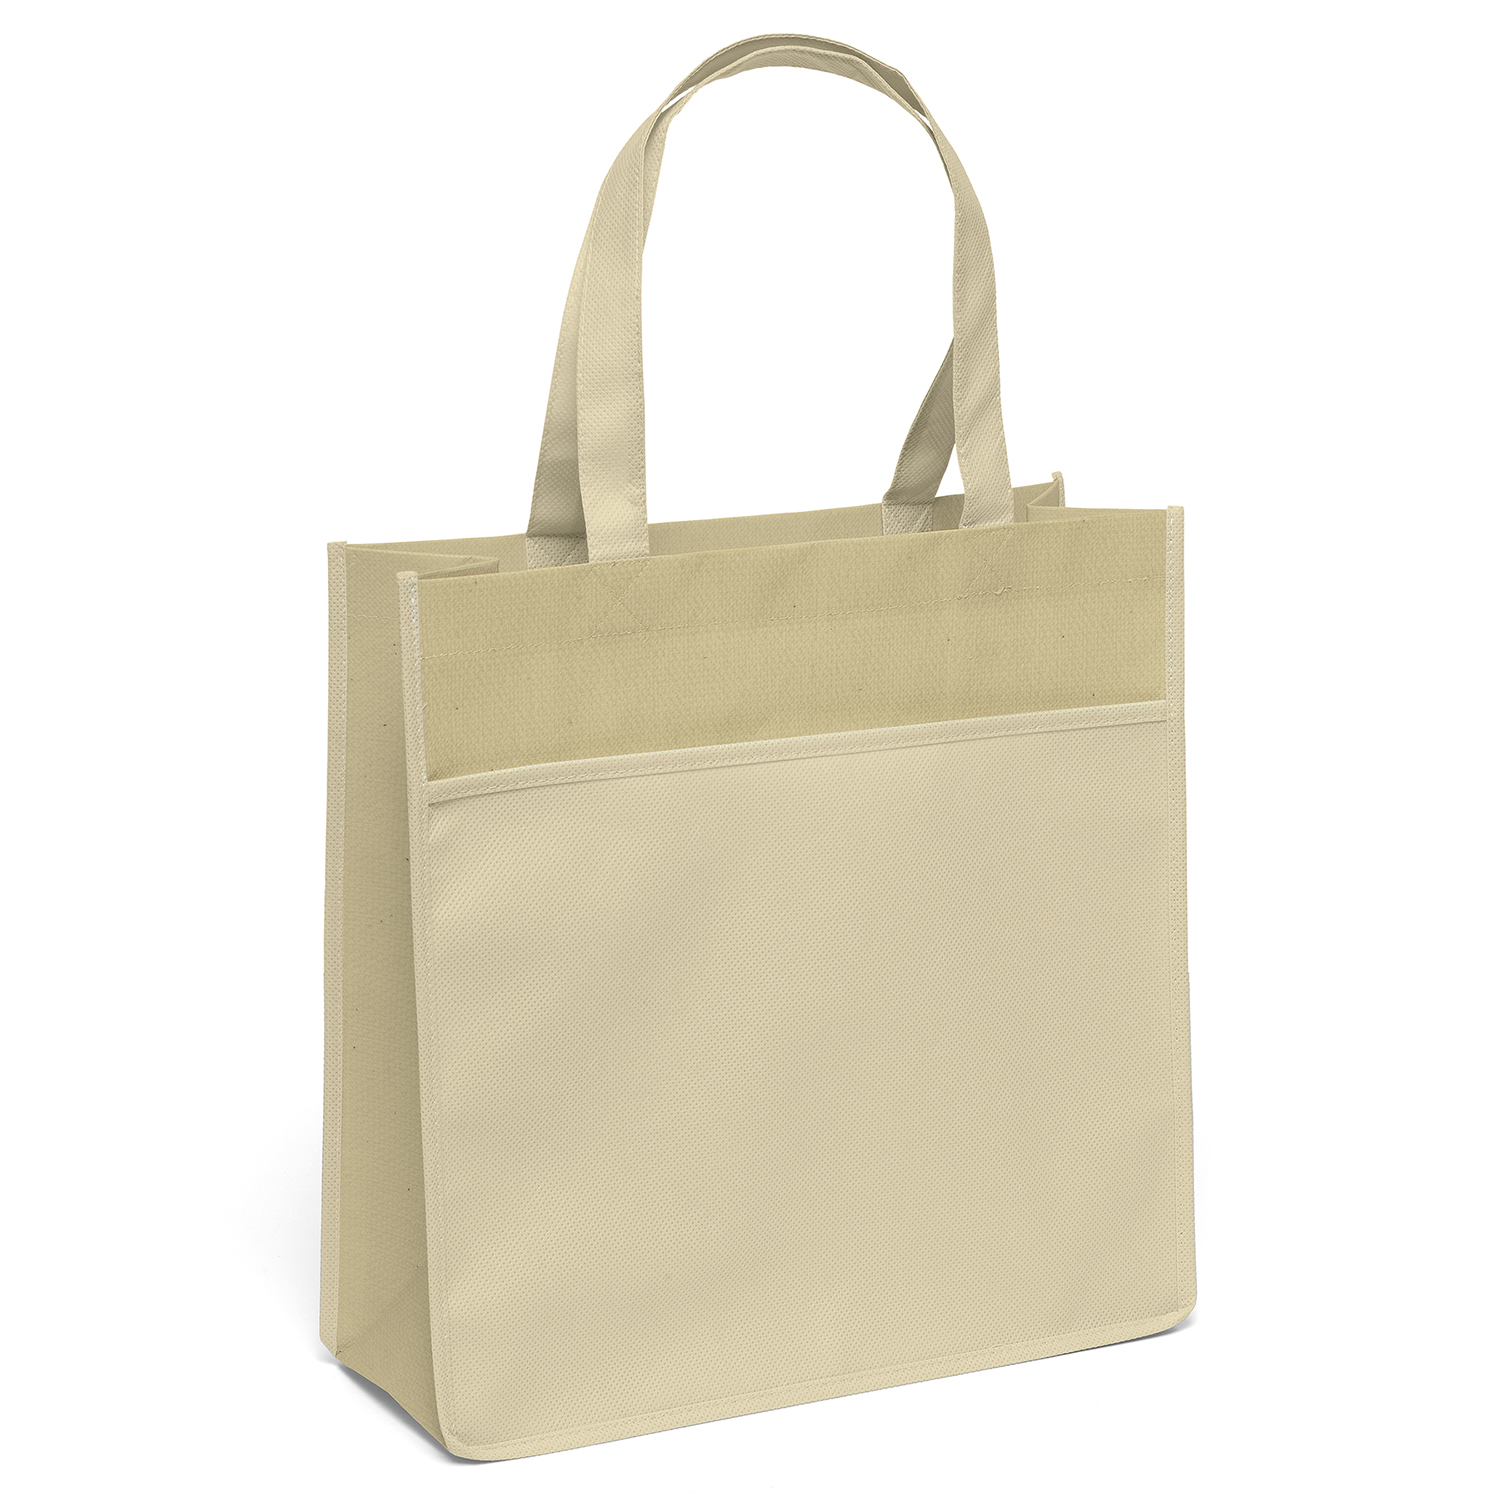 Bag Makers SPLPNAS1313 - Custom Printed Eco-Friendly Promotional Non-Woven Grocery Tote Bag